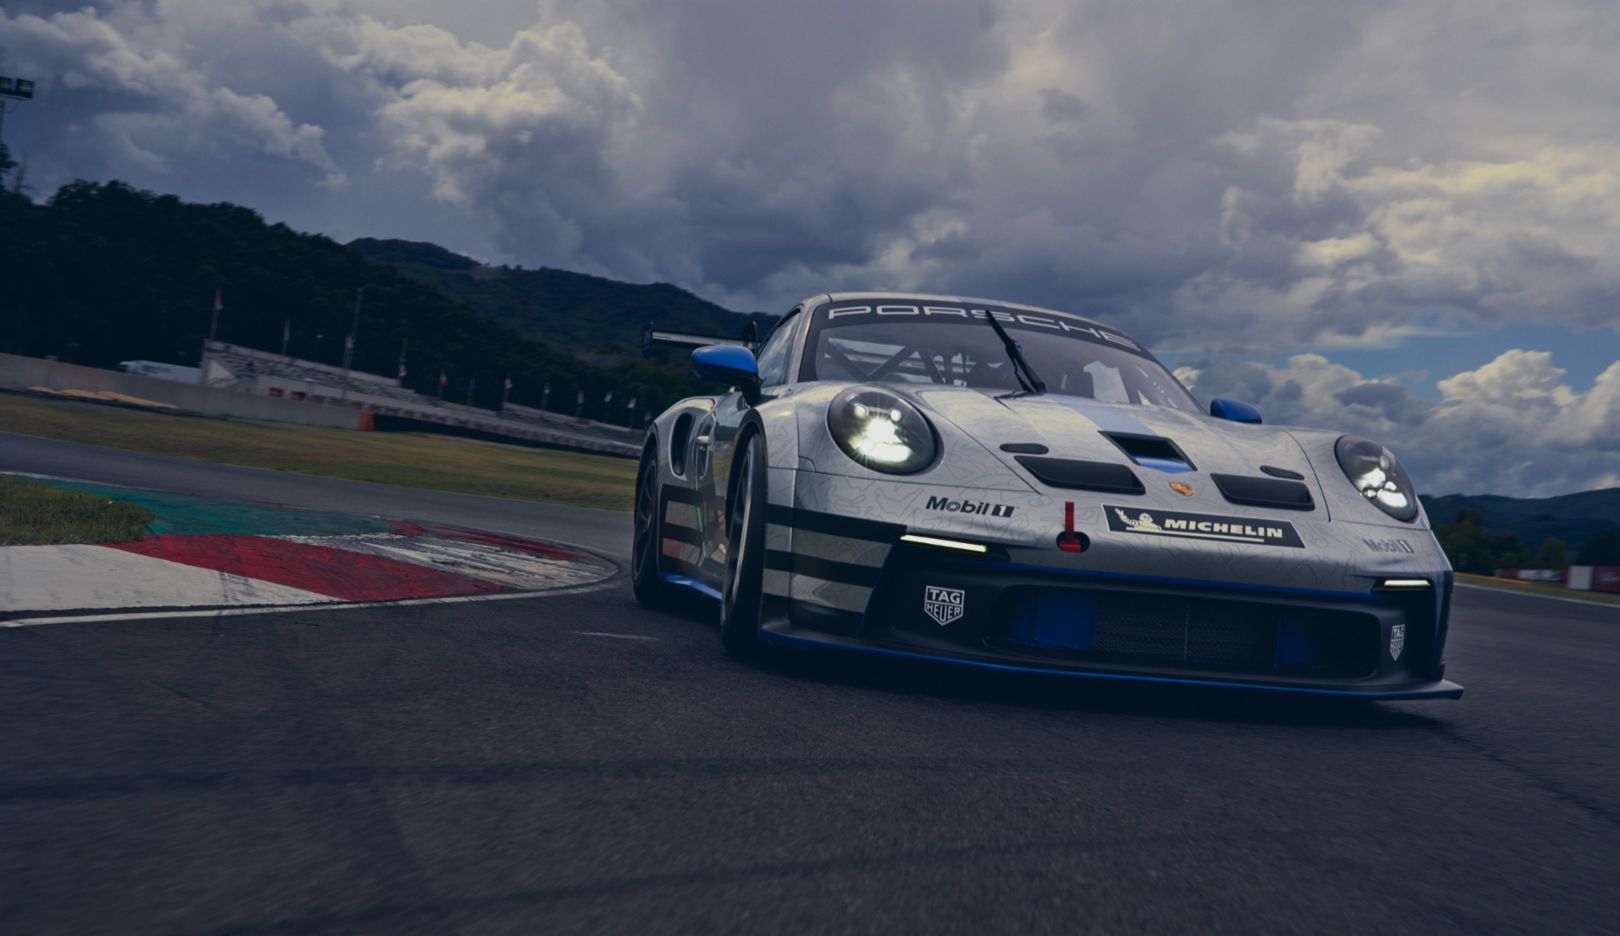 The 911 GT3 Cup for the Porsche Mobil 1 Supercup